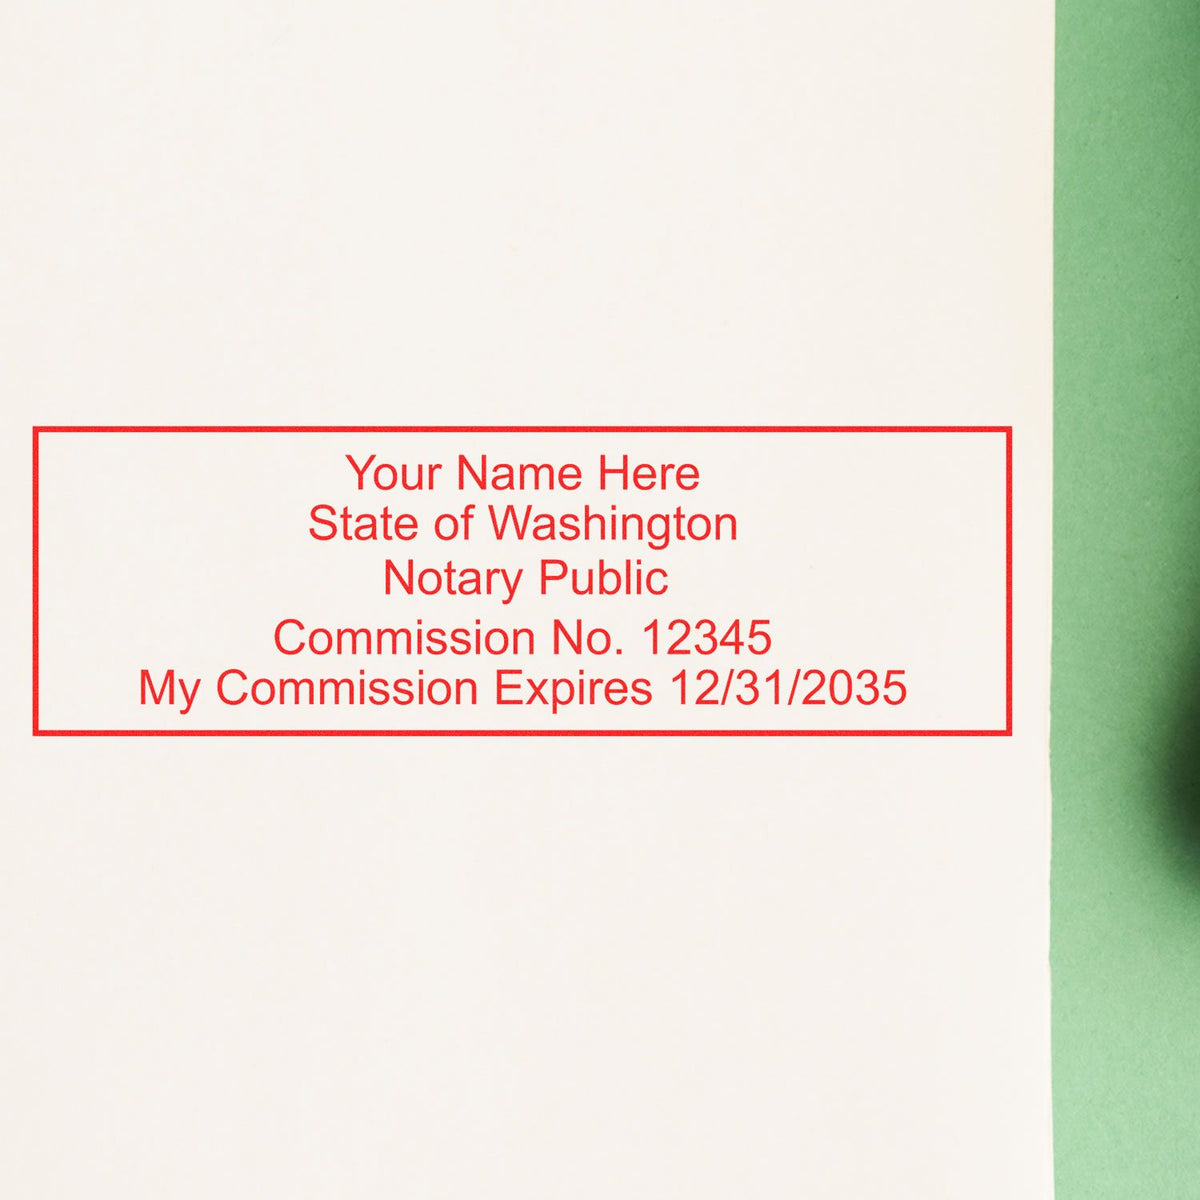 The Heavy-Duty Washington Rectangular Notary Stamp stamp impression comes to life with a crisp, detailed photo on paper - showcasing true professional quality.